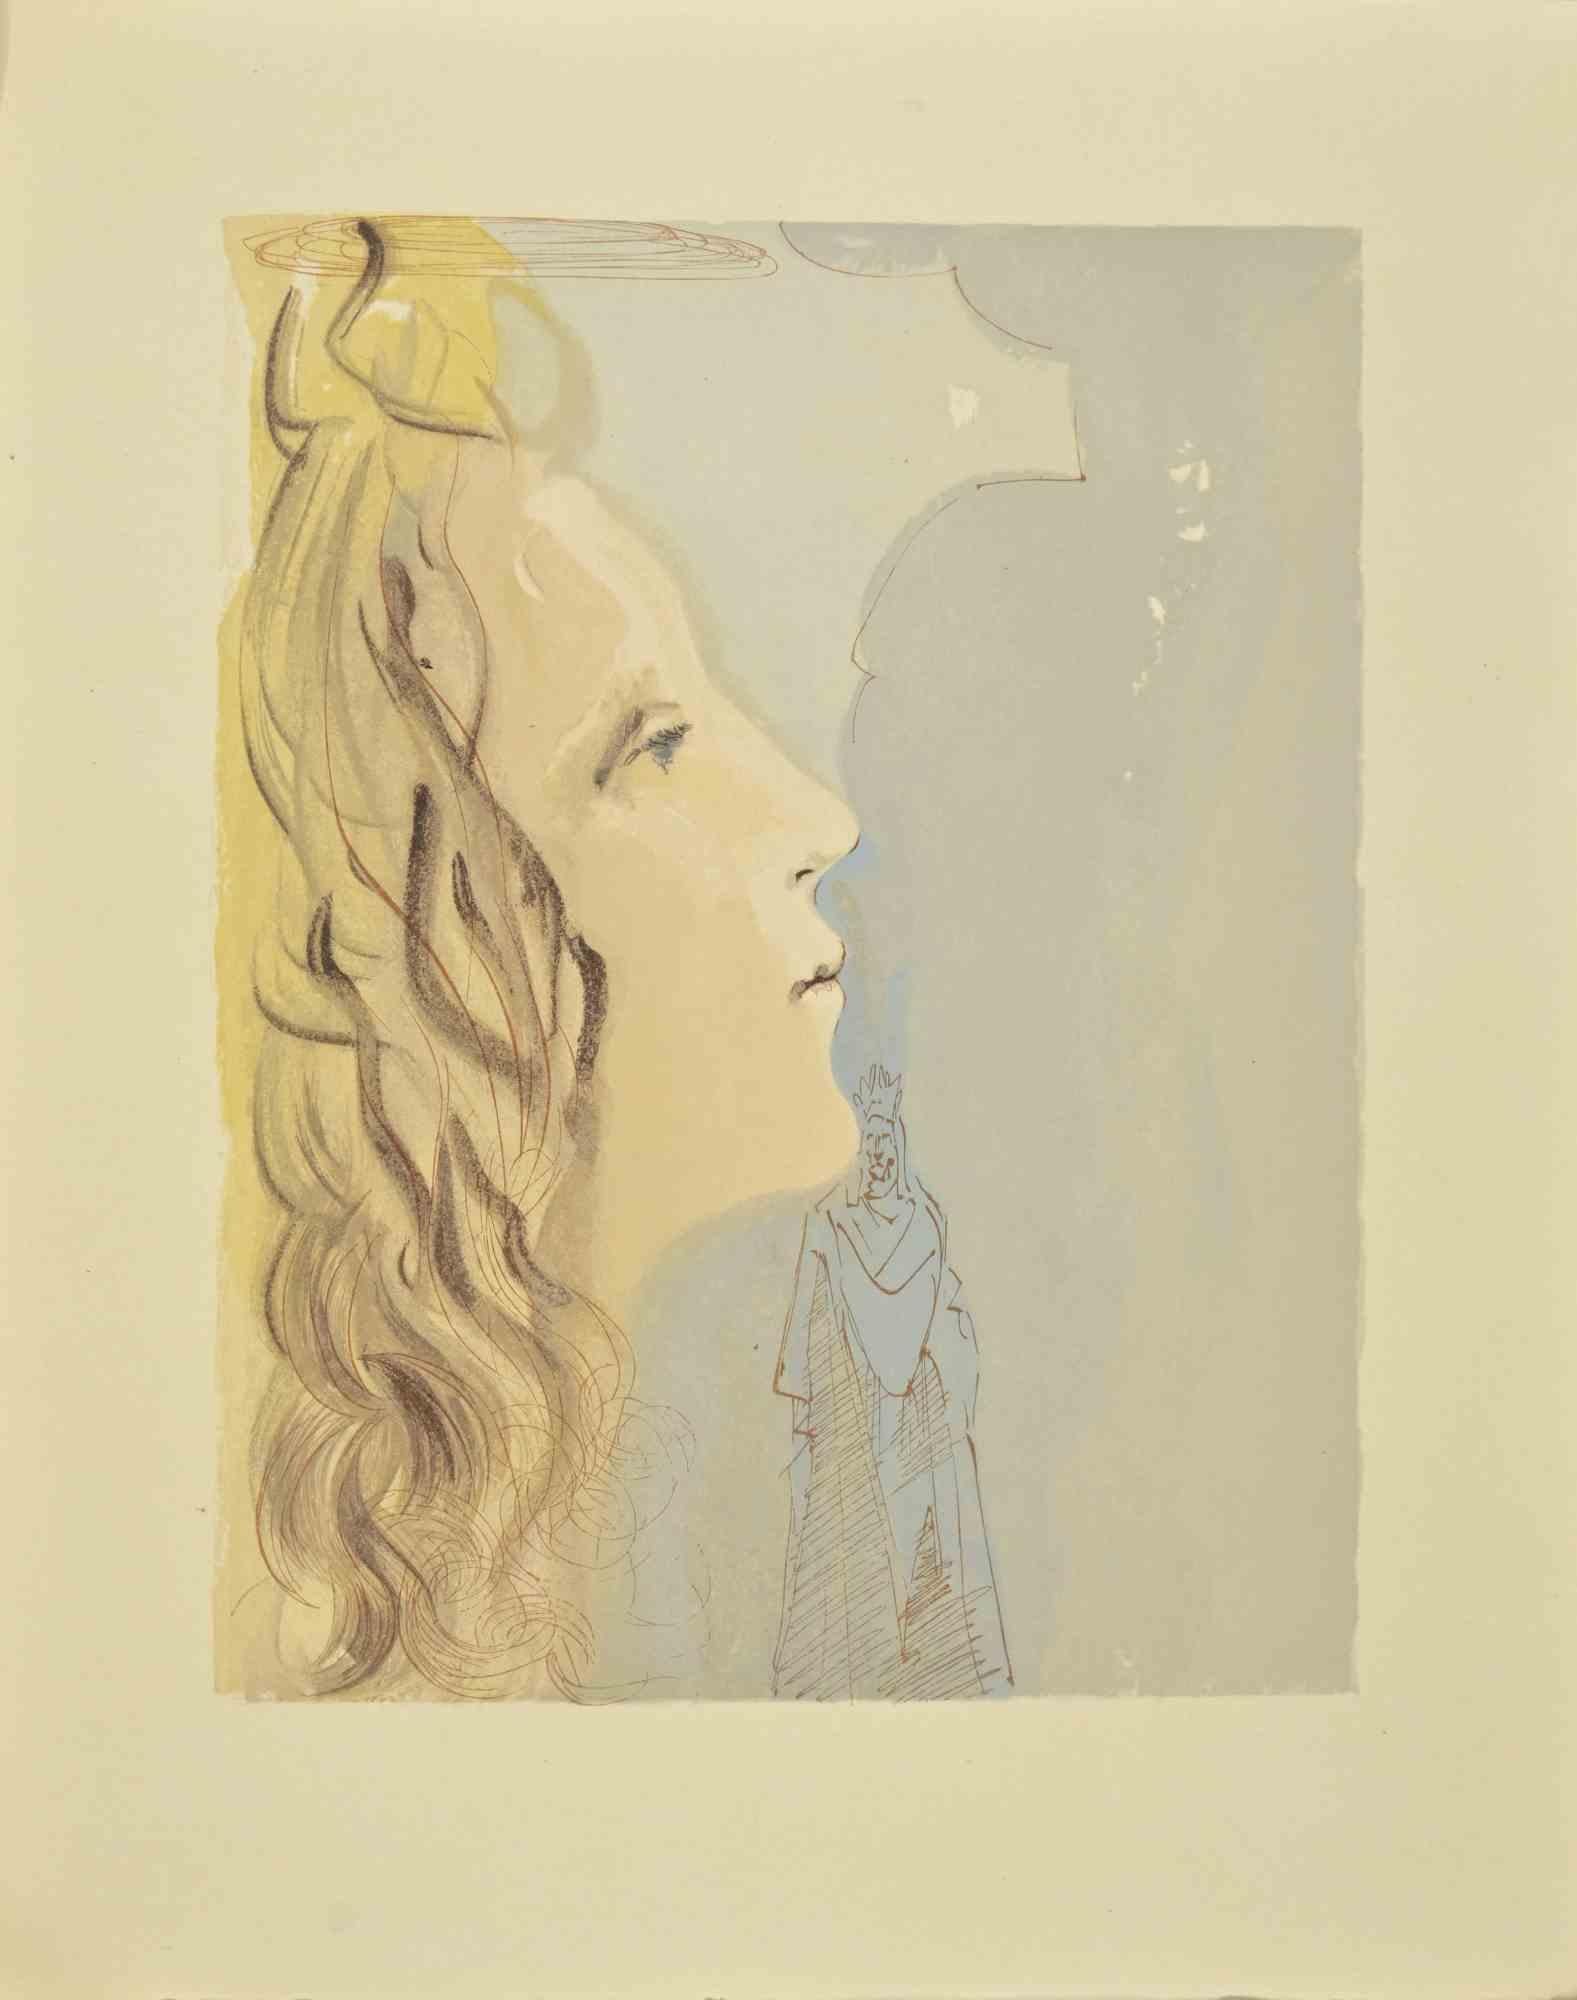 Salvador Dalí Figurative Print - The Greatest Beauty of Beatrice - Woodcut  - 1963